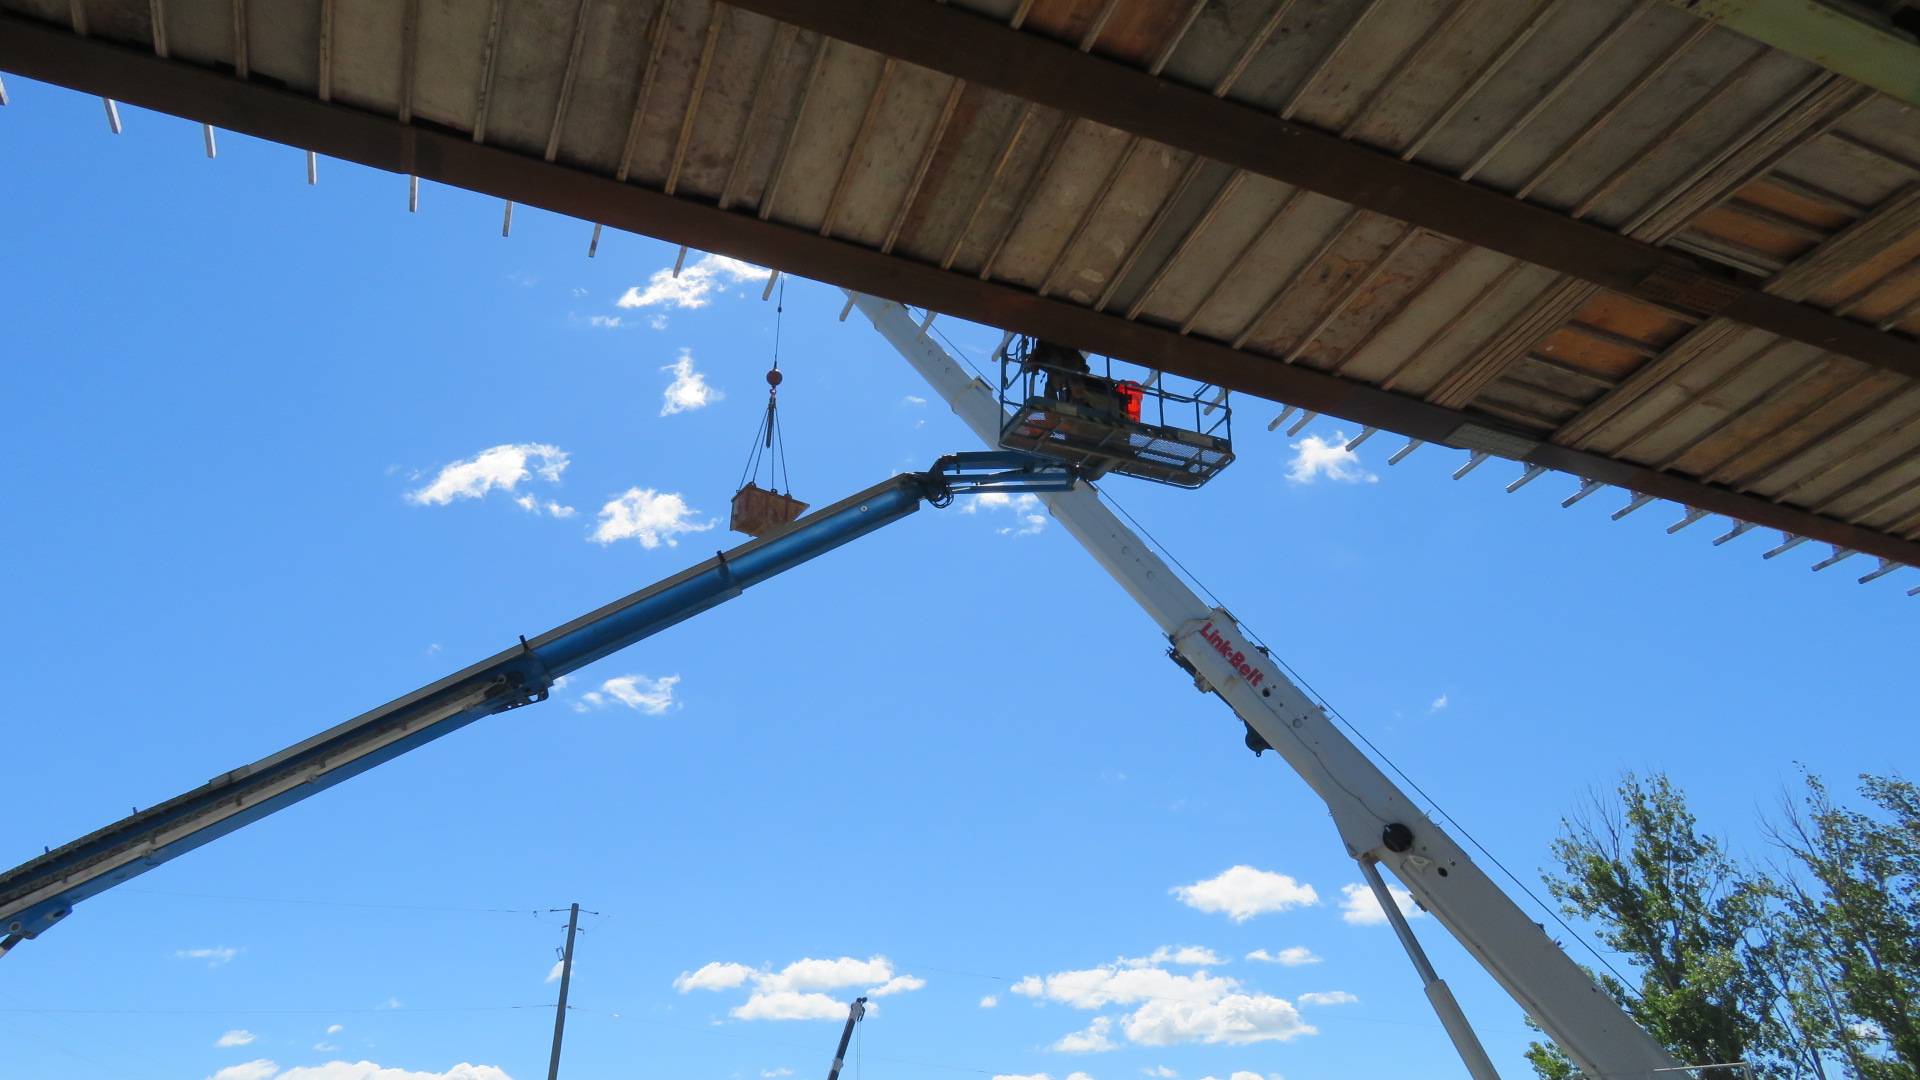 160-ton crane lifting the debris bucket, manlift used to tighten the brackets